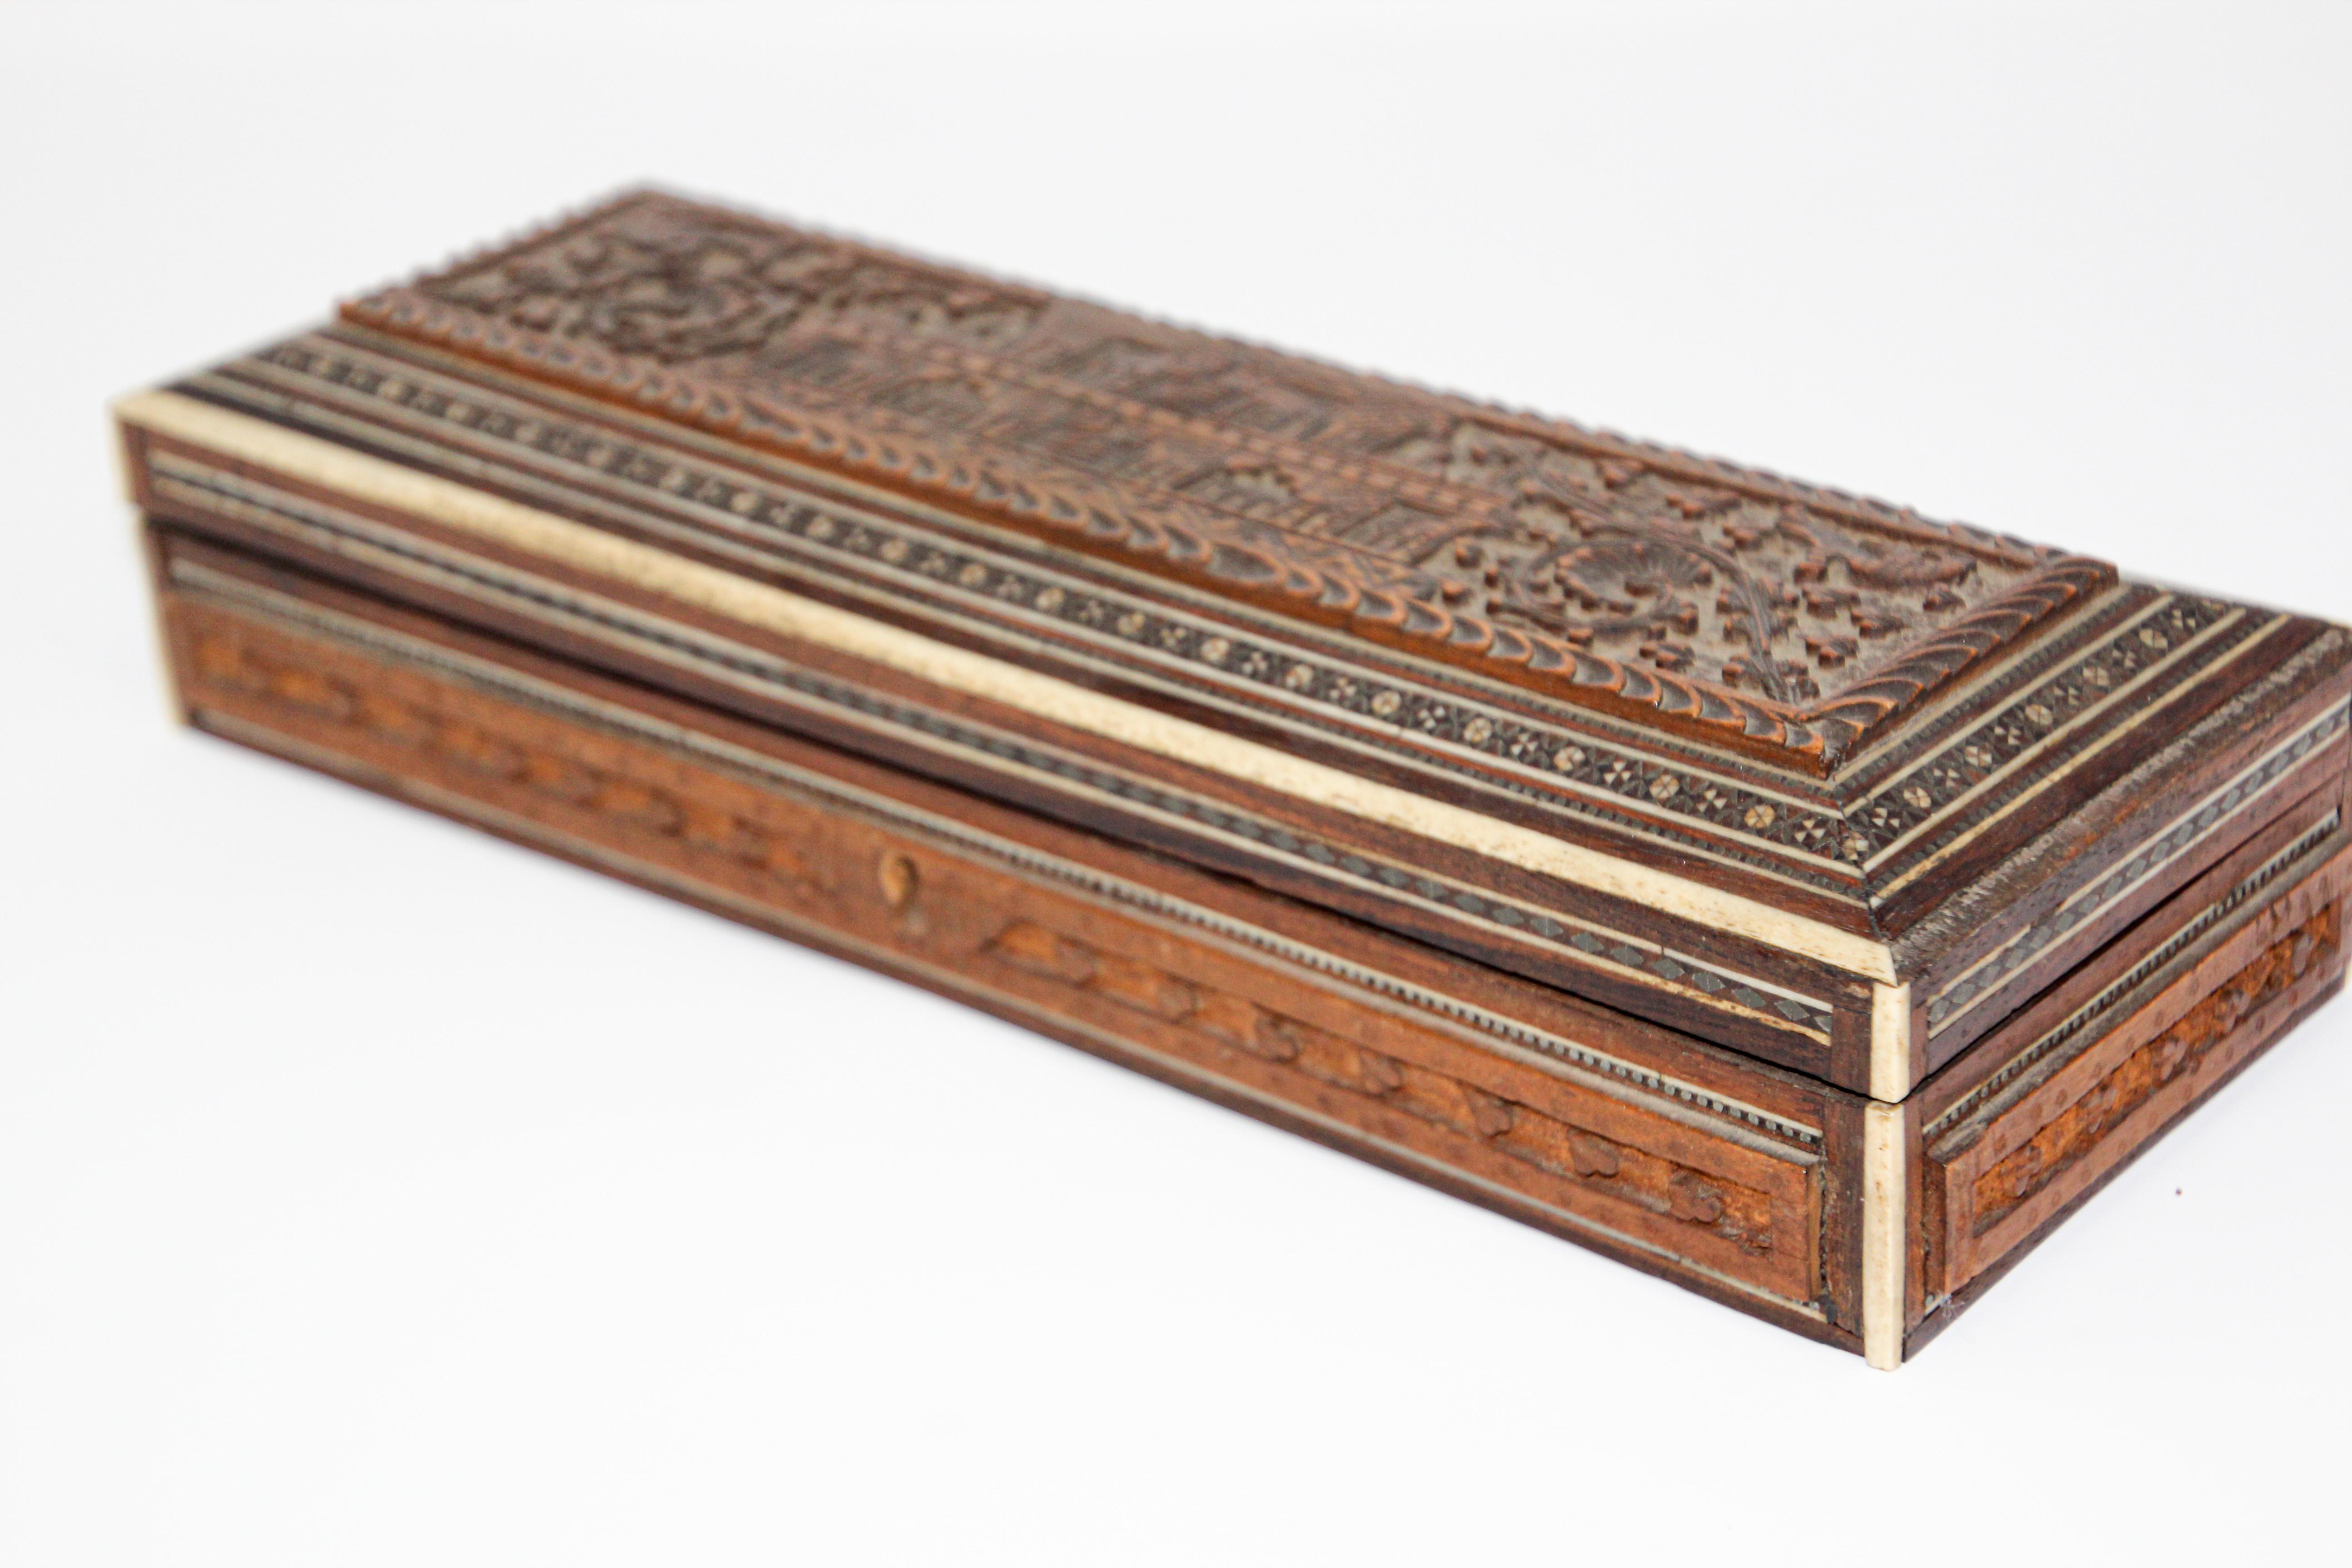 Fine antique Anglo-Indian hand carved wooden jewelry box inlaid.
A Nice Mughal Anglo Indian Pen Box
19th Century
The box with a Mughal Indian palace architectural motif design intricately carved.
Mosaic marquetryl, satinwood adorn this exquisite